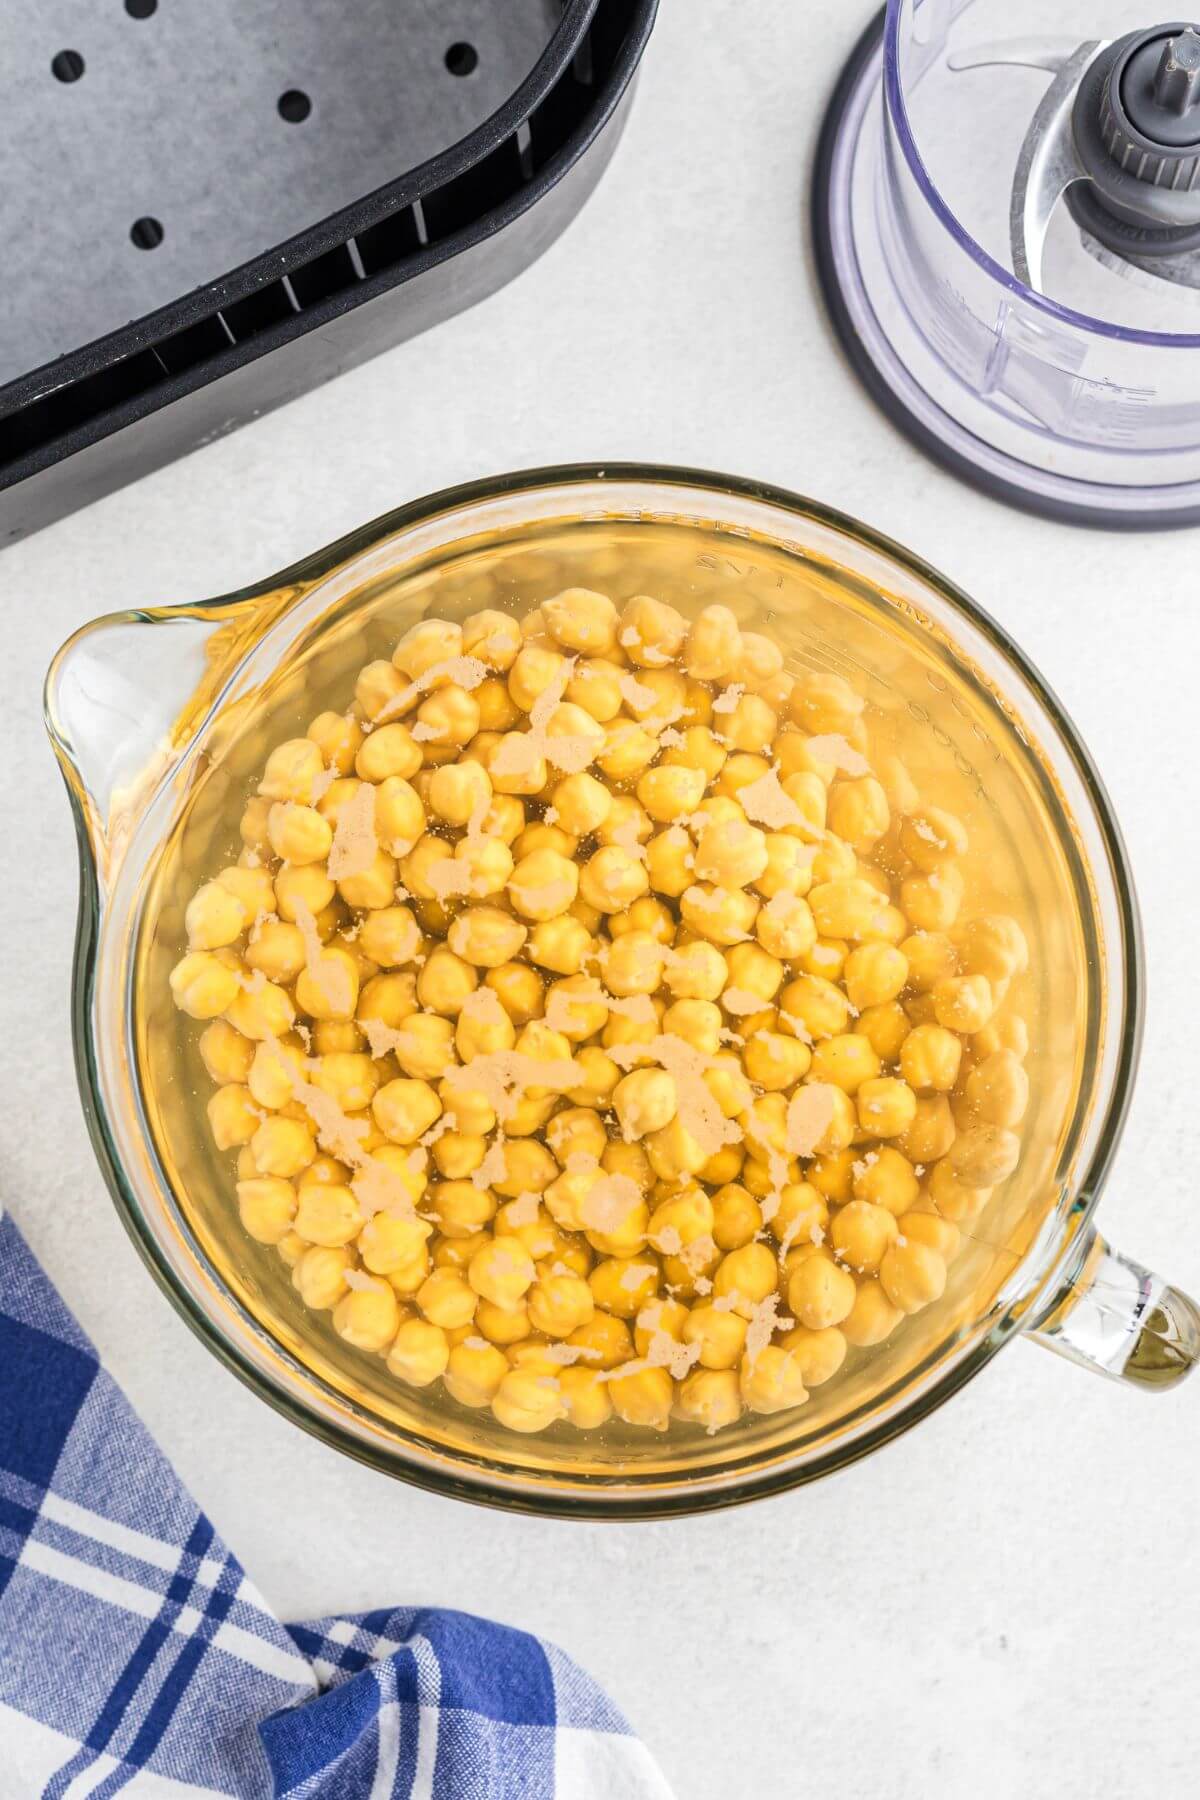 Chickpeas being soaked in water.